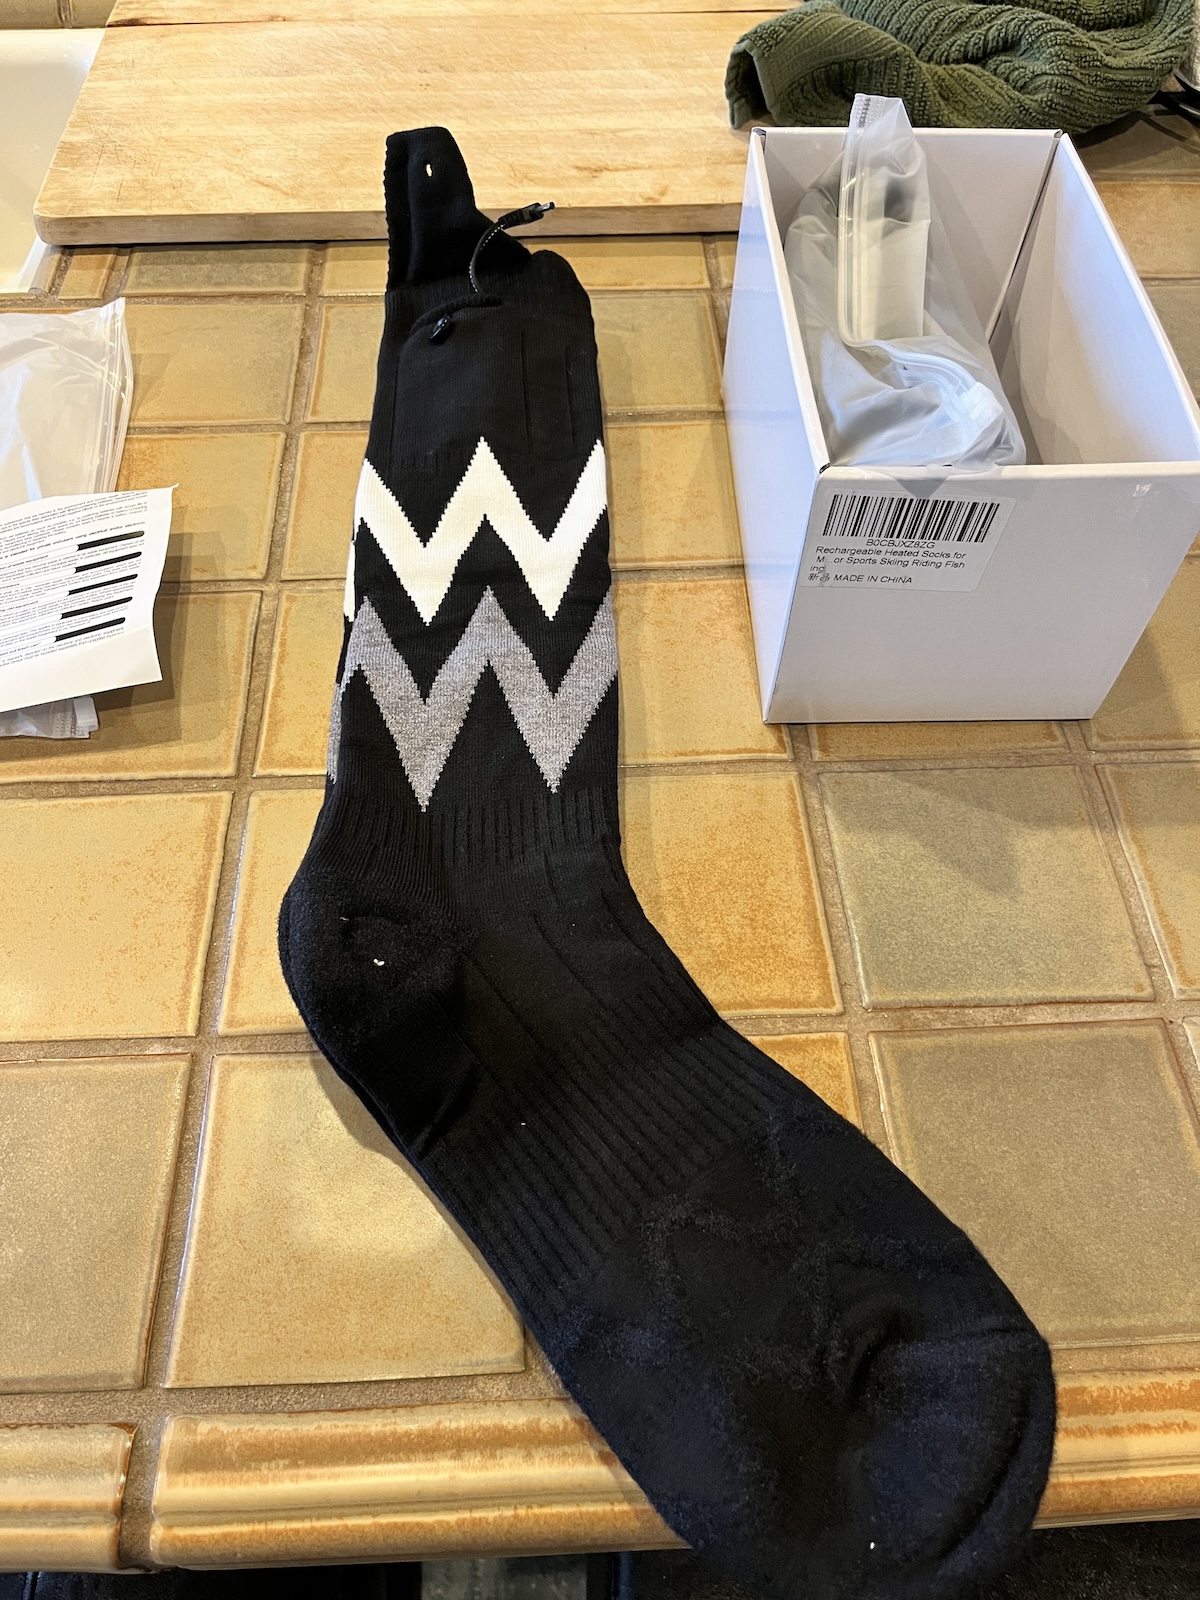 Anyone ever used heated socks? | Backcountry Gallery Photography Forums